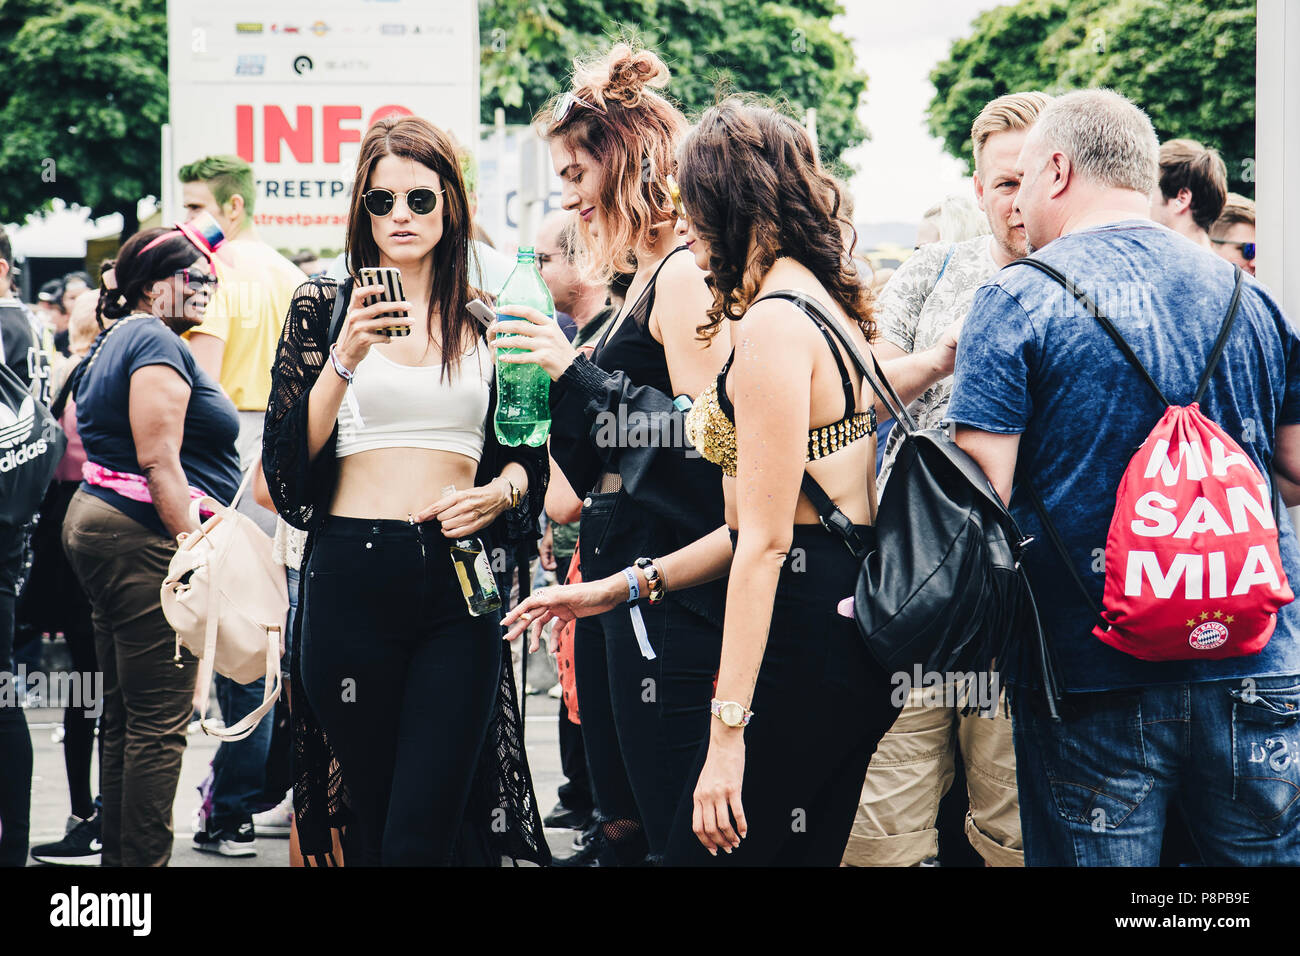 Zurich, Switzerland - August 12, 2017: People of all ages on the Street  Parade in Zürich. Young women using smartphones, older men talking to each  oth Stock Photo - Alamy